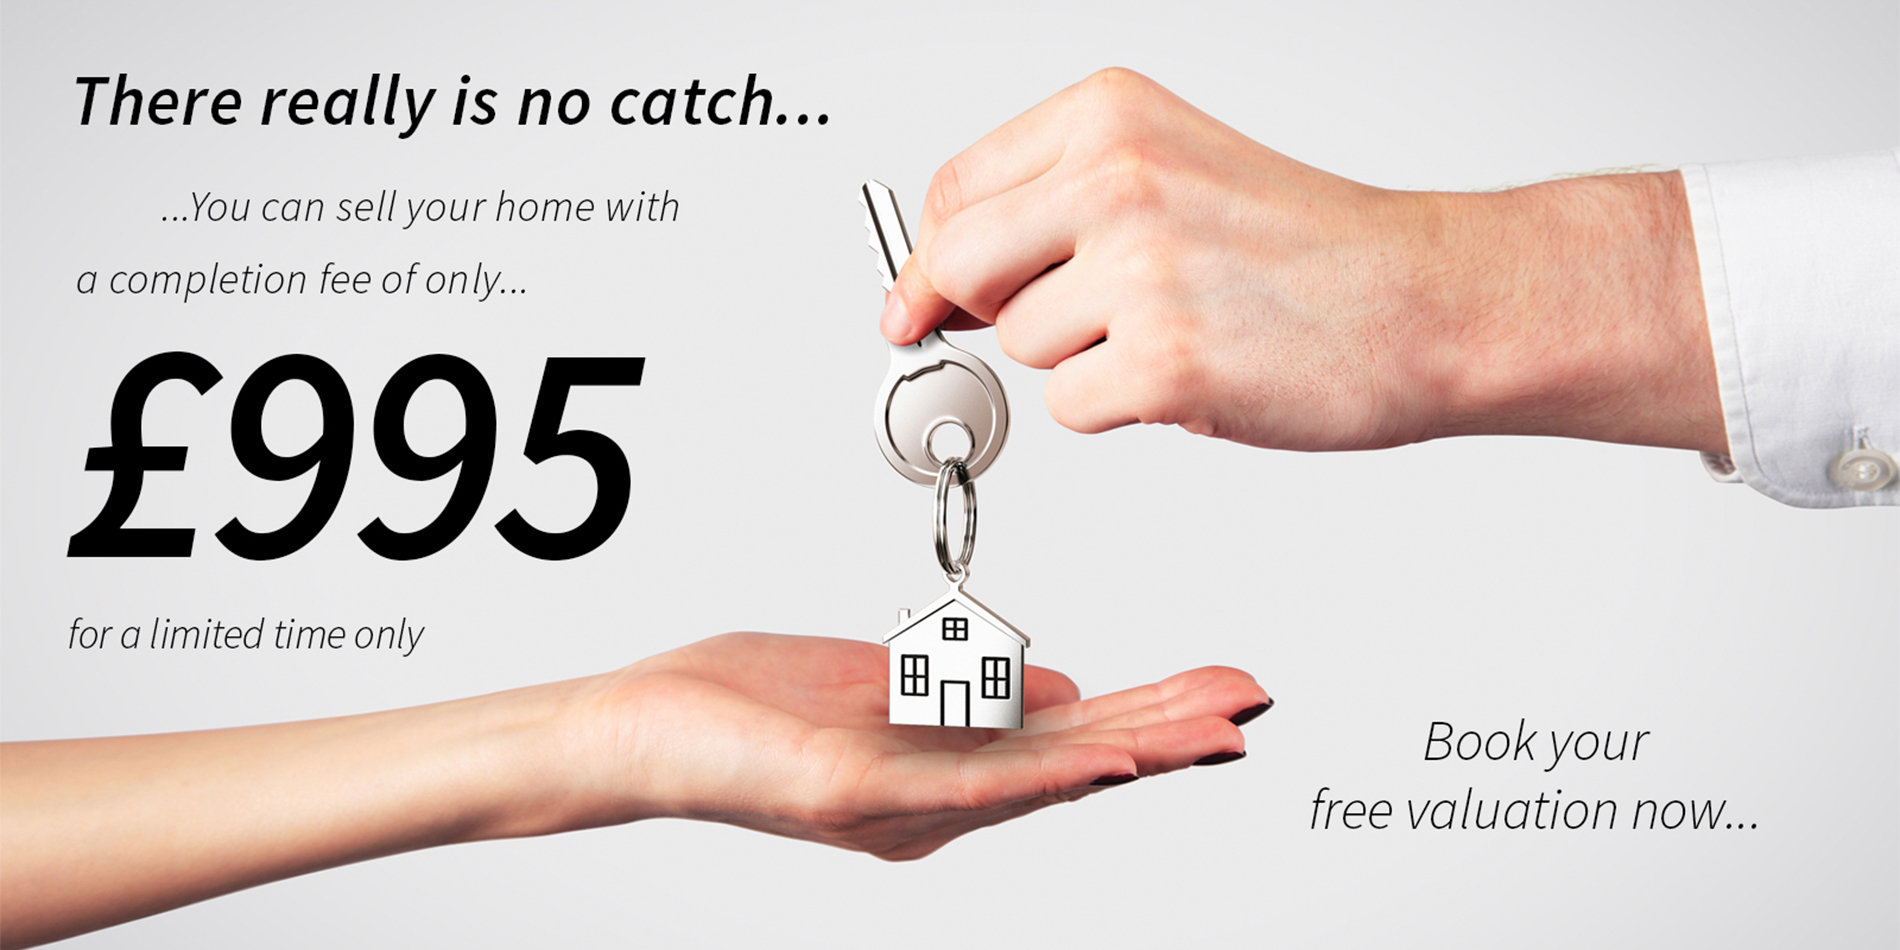 Sales Banner - You can sell your home with a completion fee of only £995 for a limited time only.